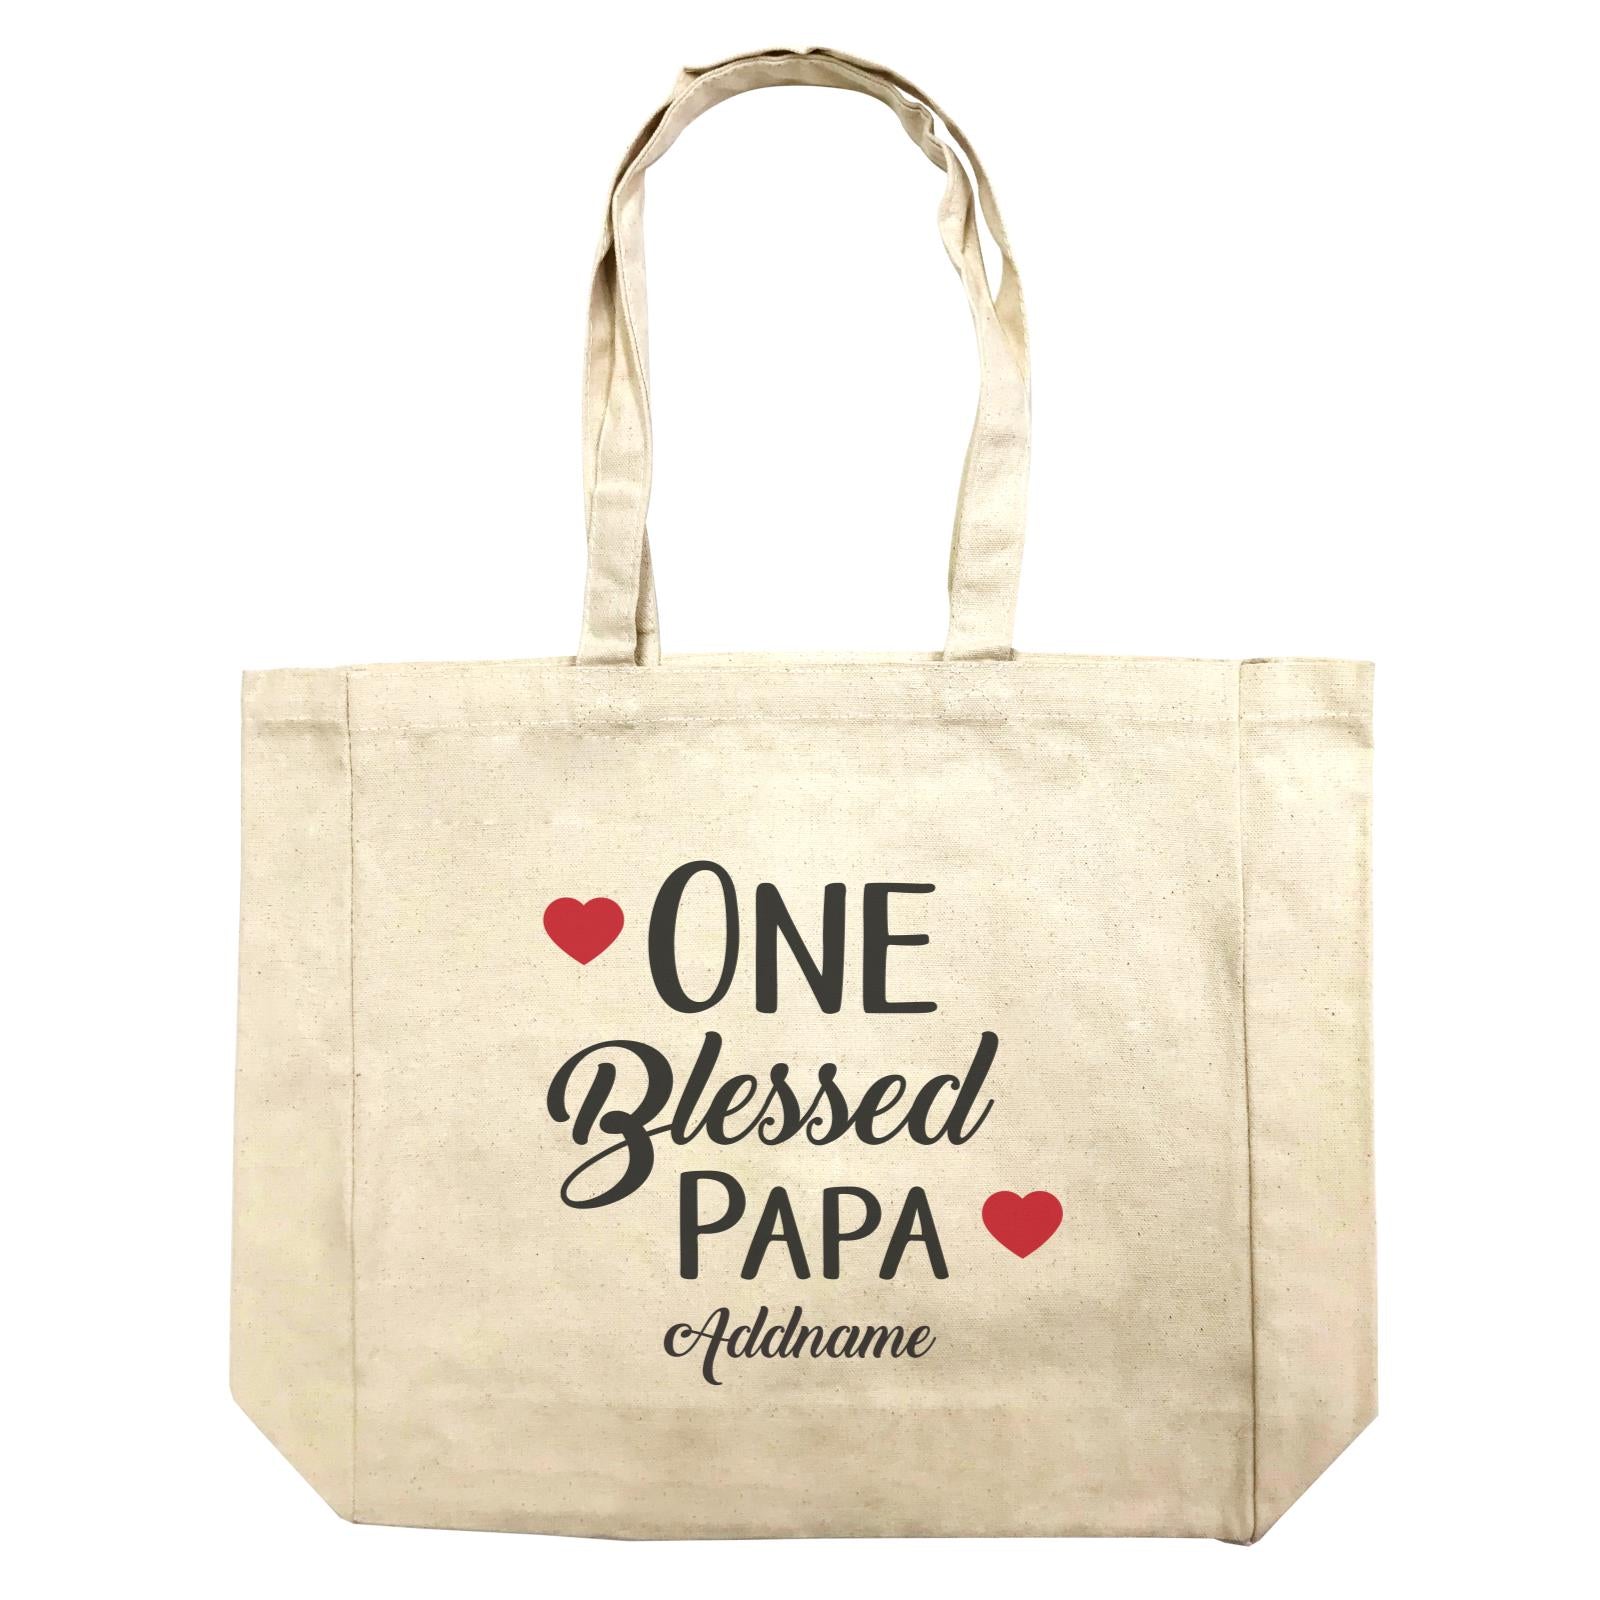 Christian Series One Blessed Papa Addname Shopping Bag